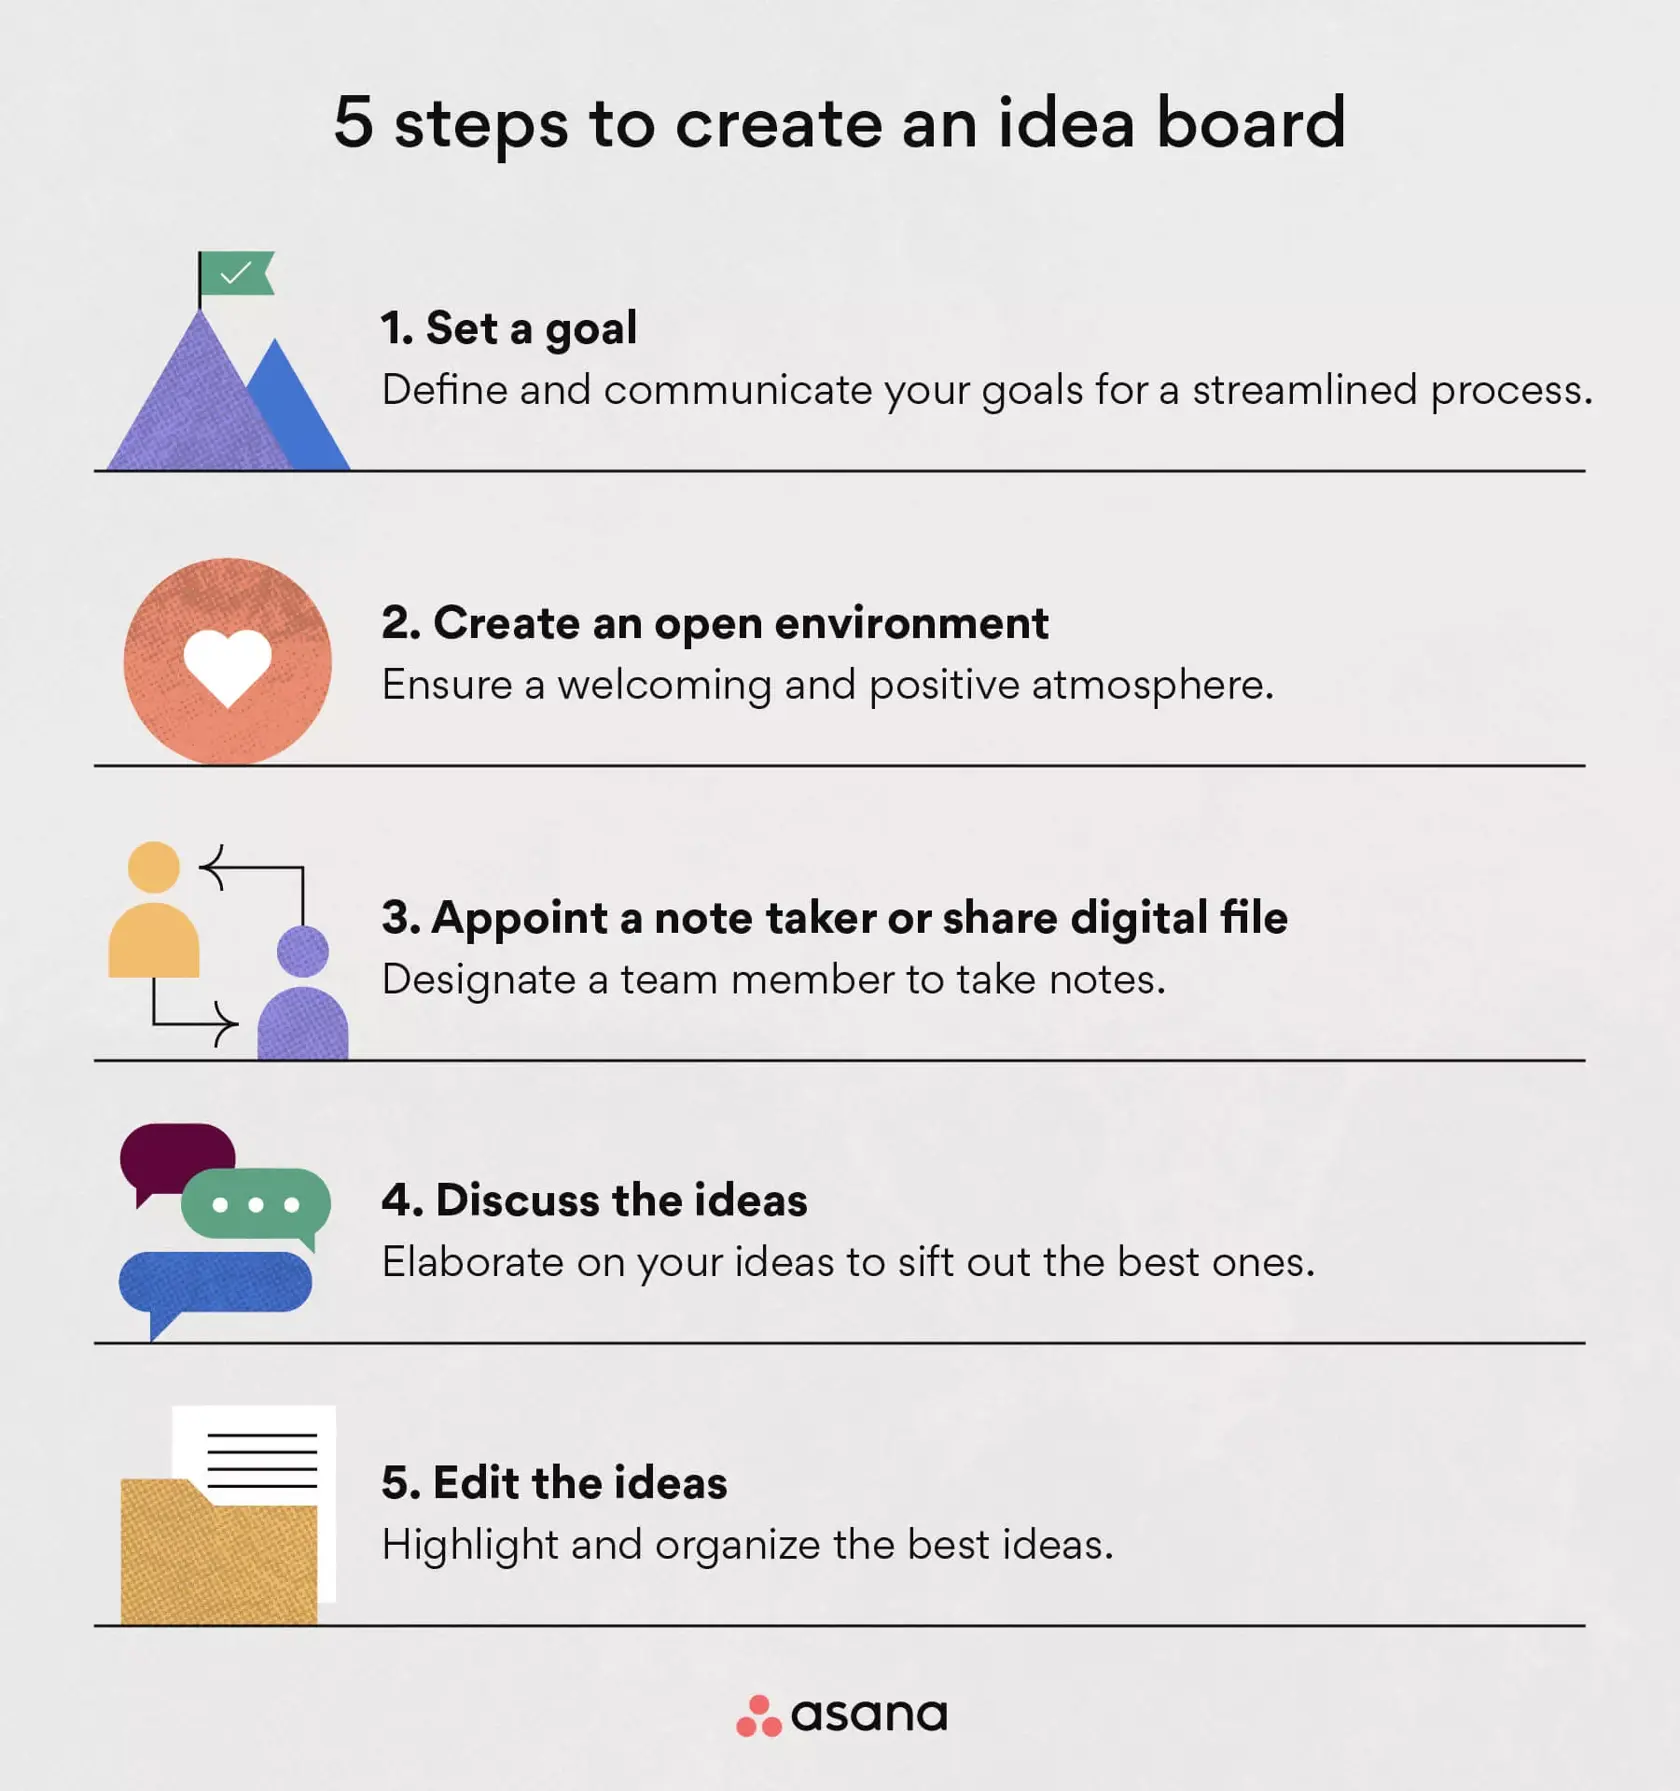 [inline illustration] How to create an idea board (infographic)